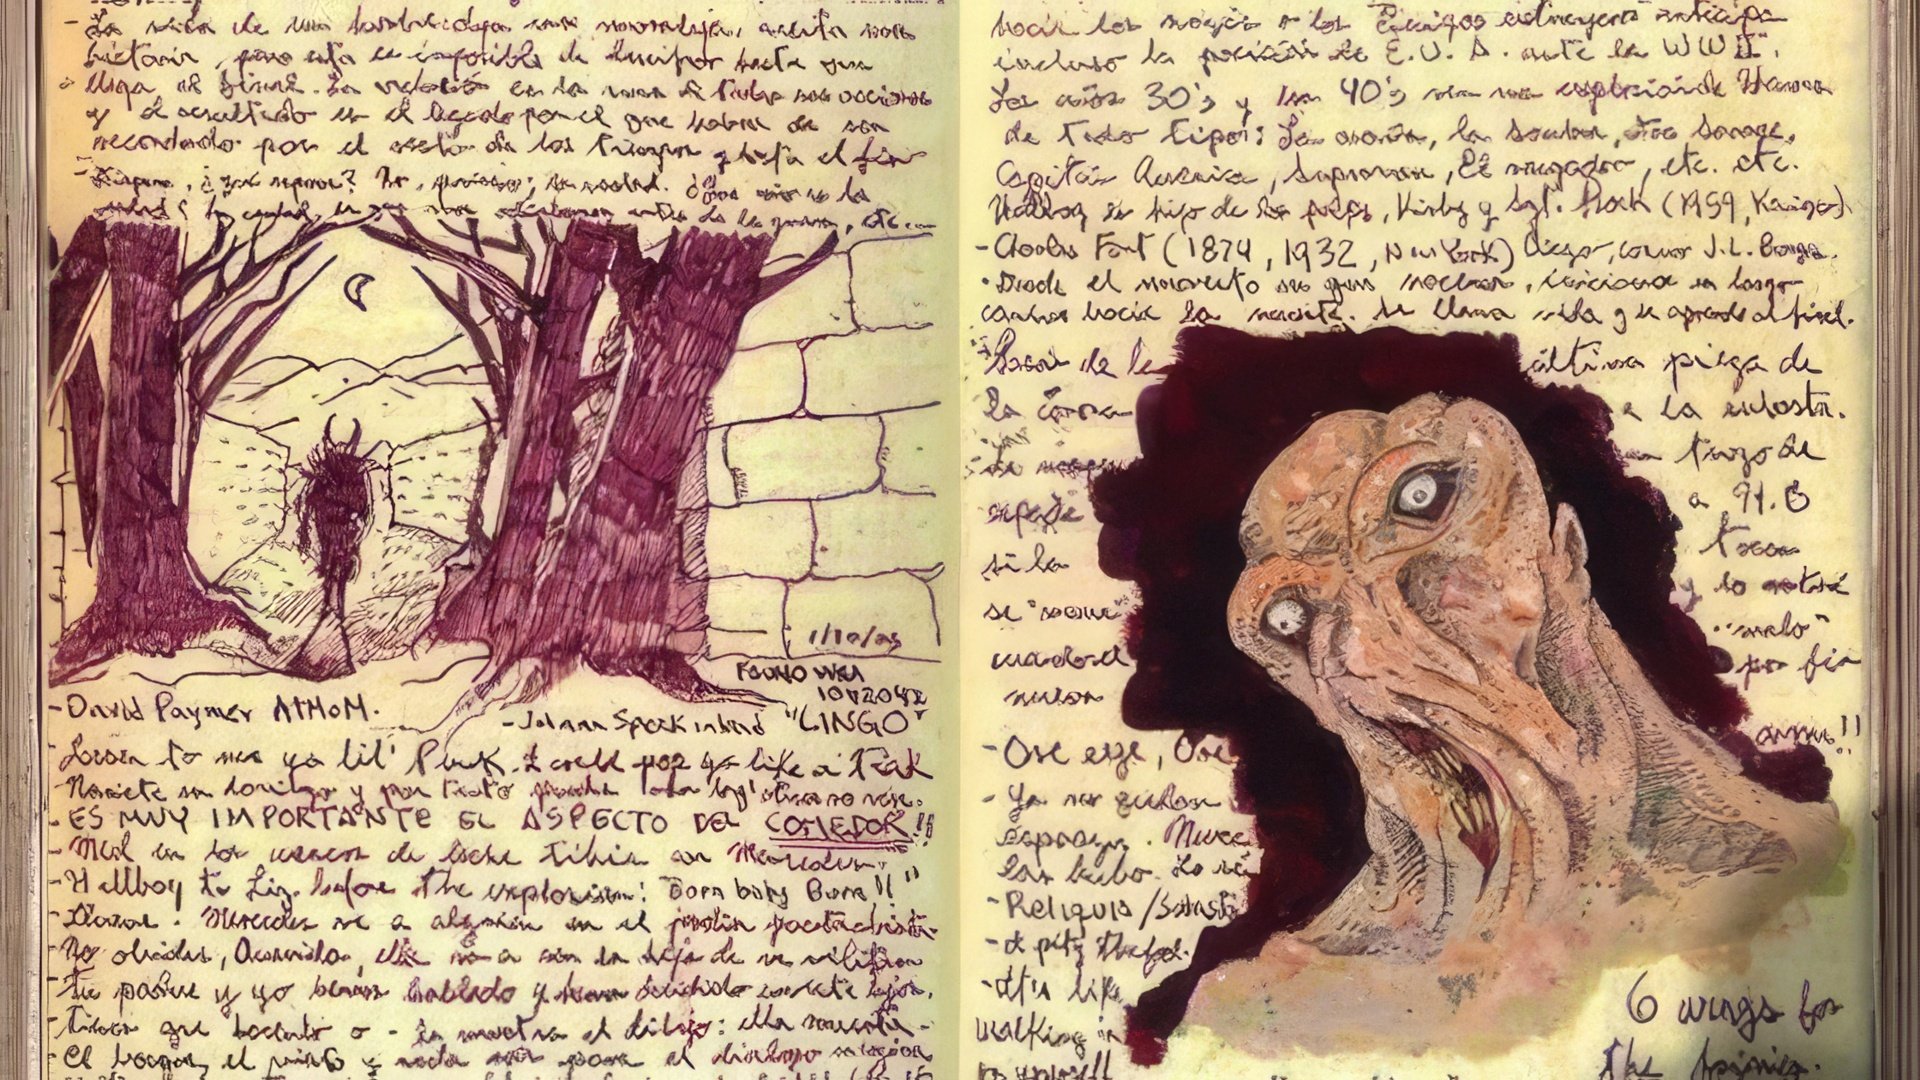 A fragment from del Toro's sketchbook